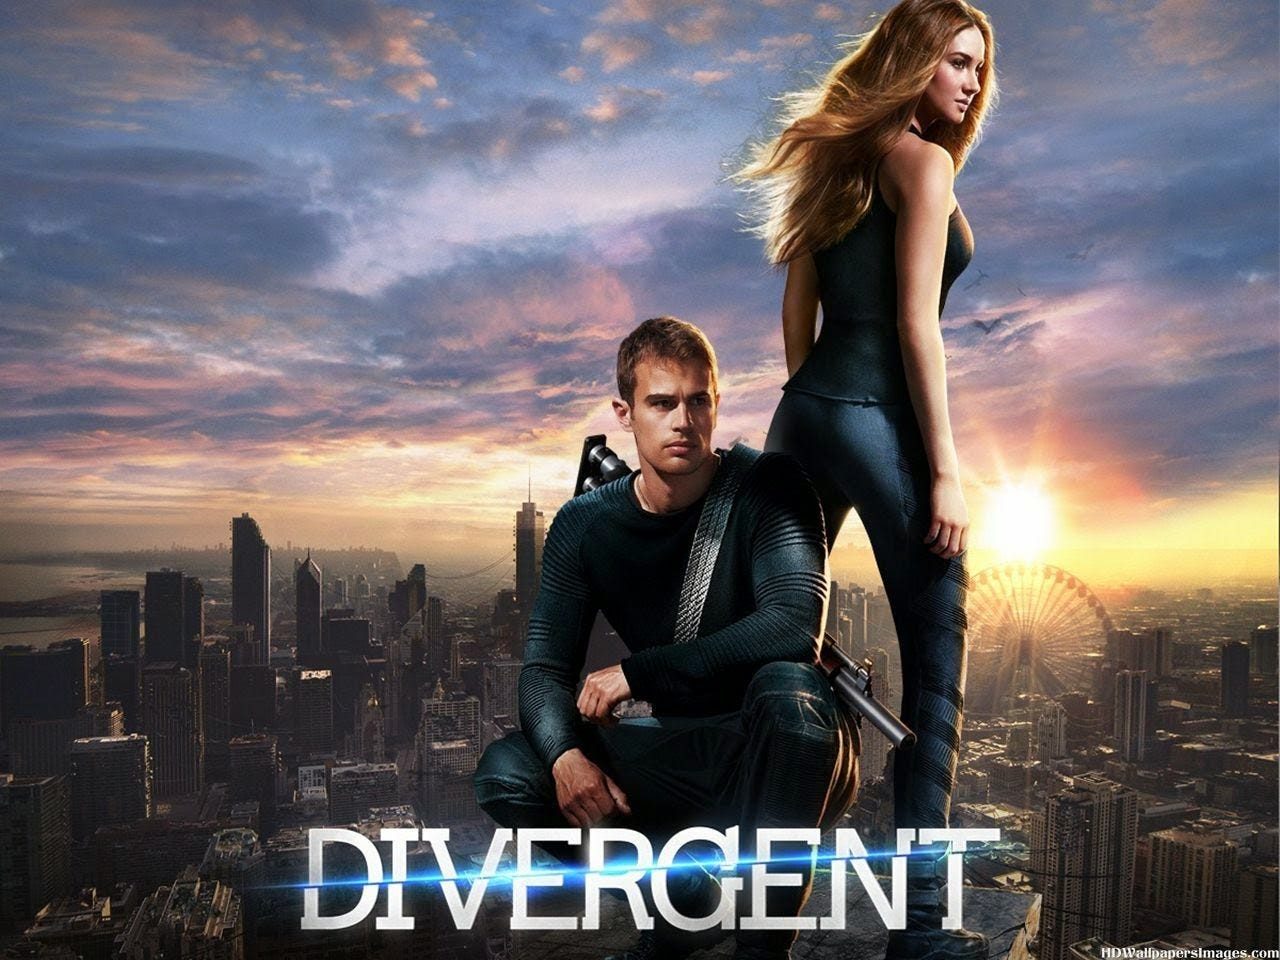 Divergent starring Shailene Woodley, click here to watch the movie.